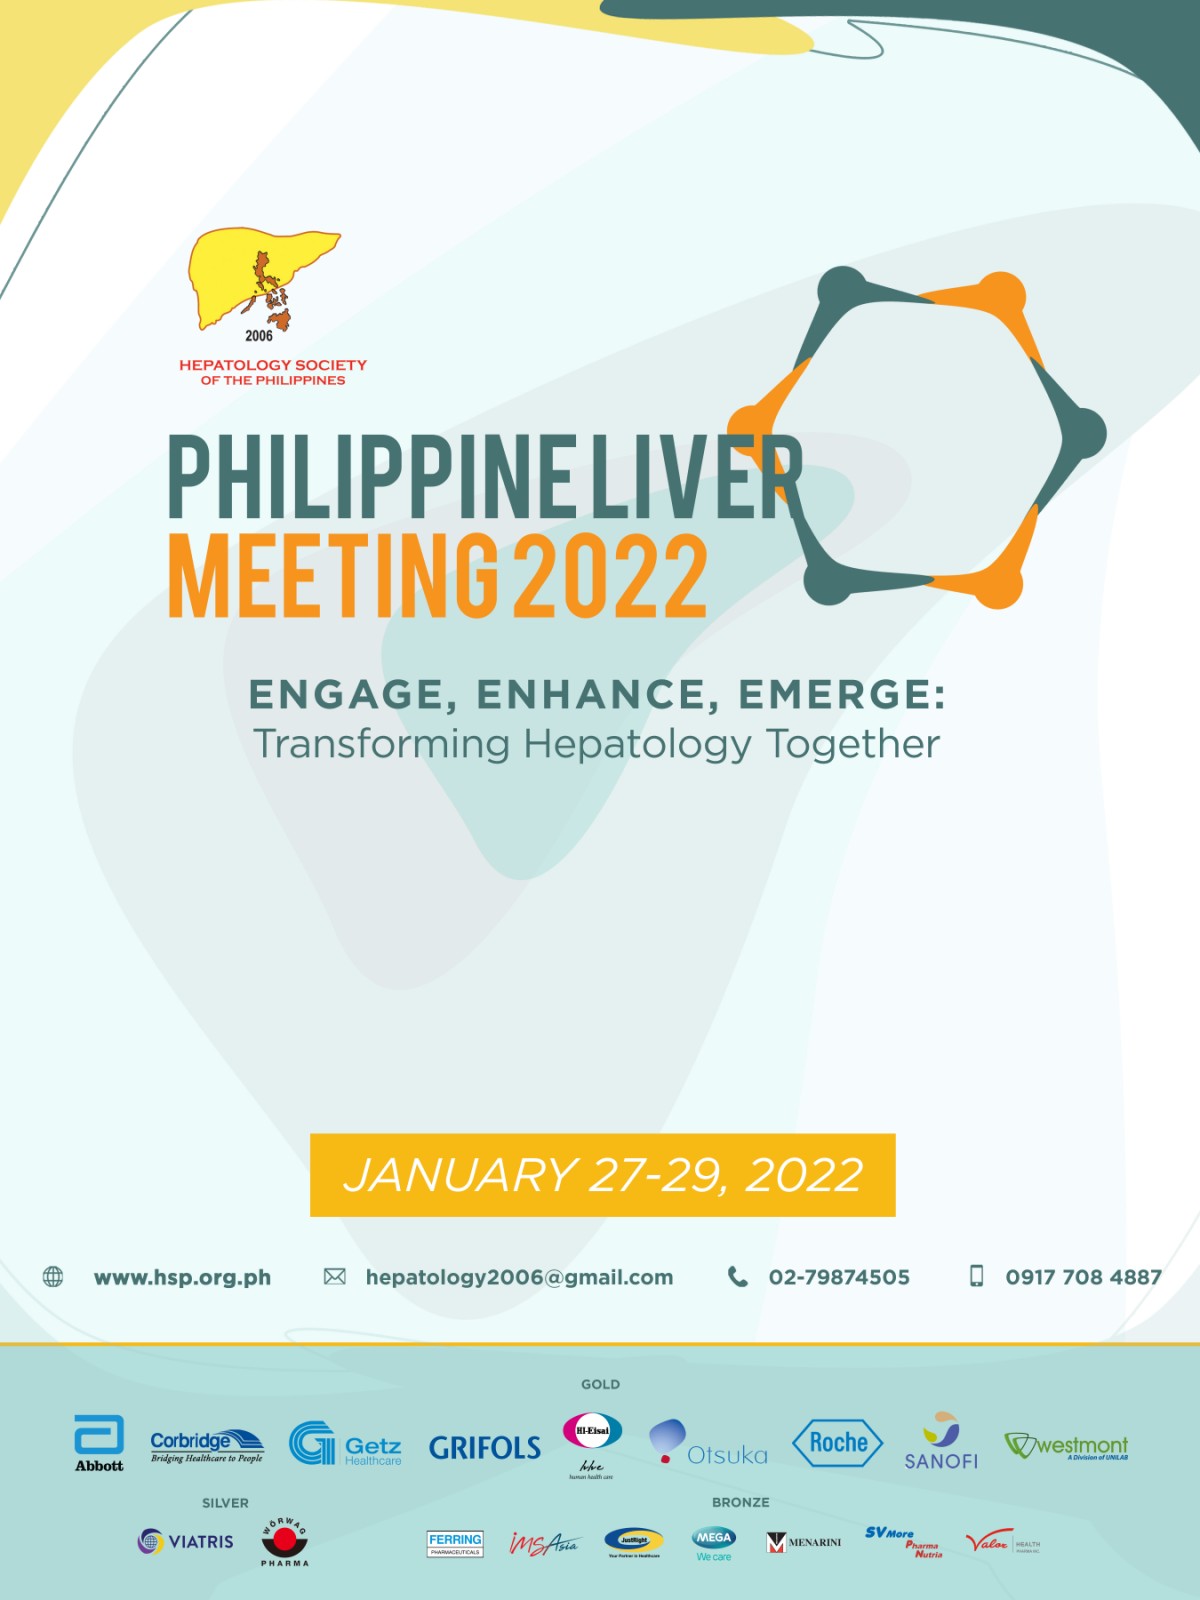 Philippine Liver Meeting 2022 Hepatology Society of the Philippines